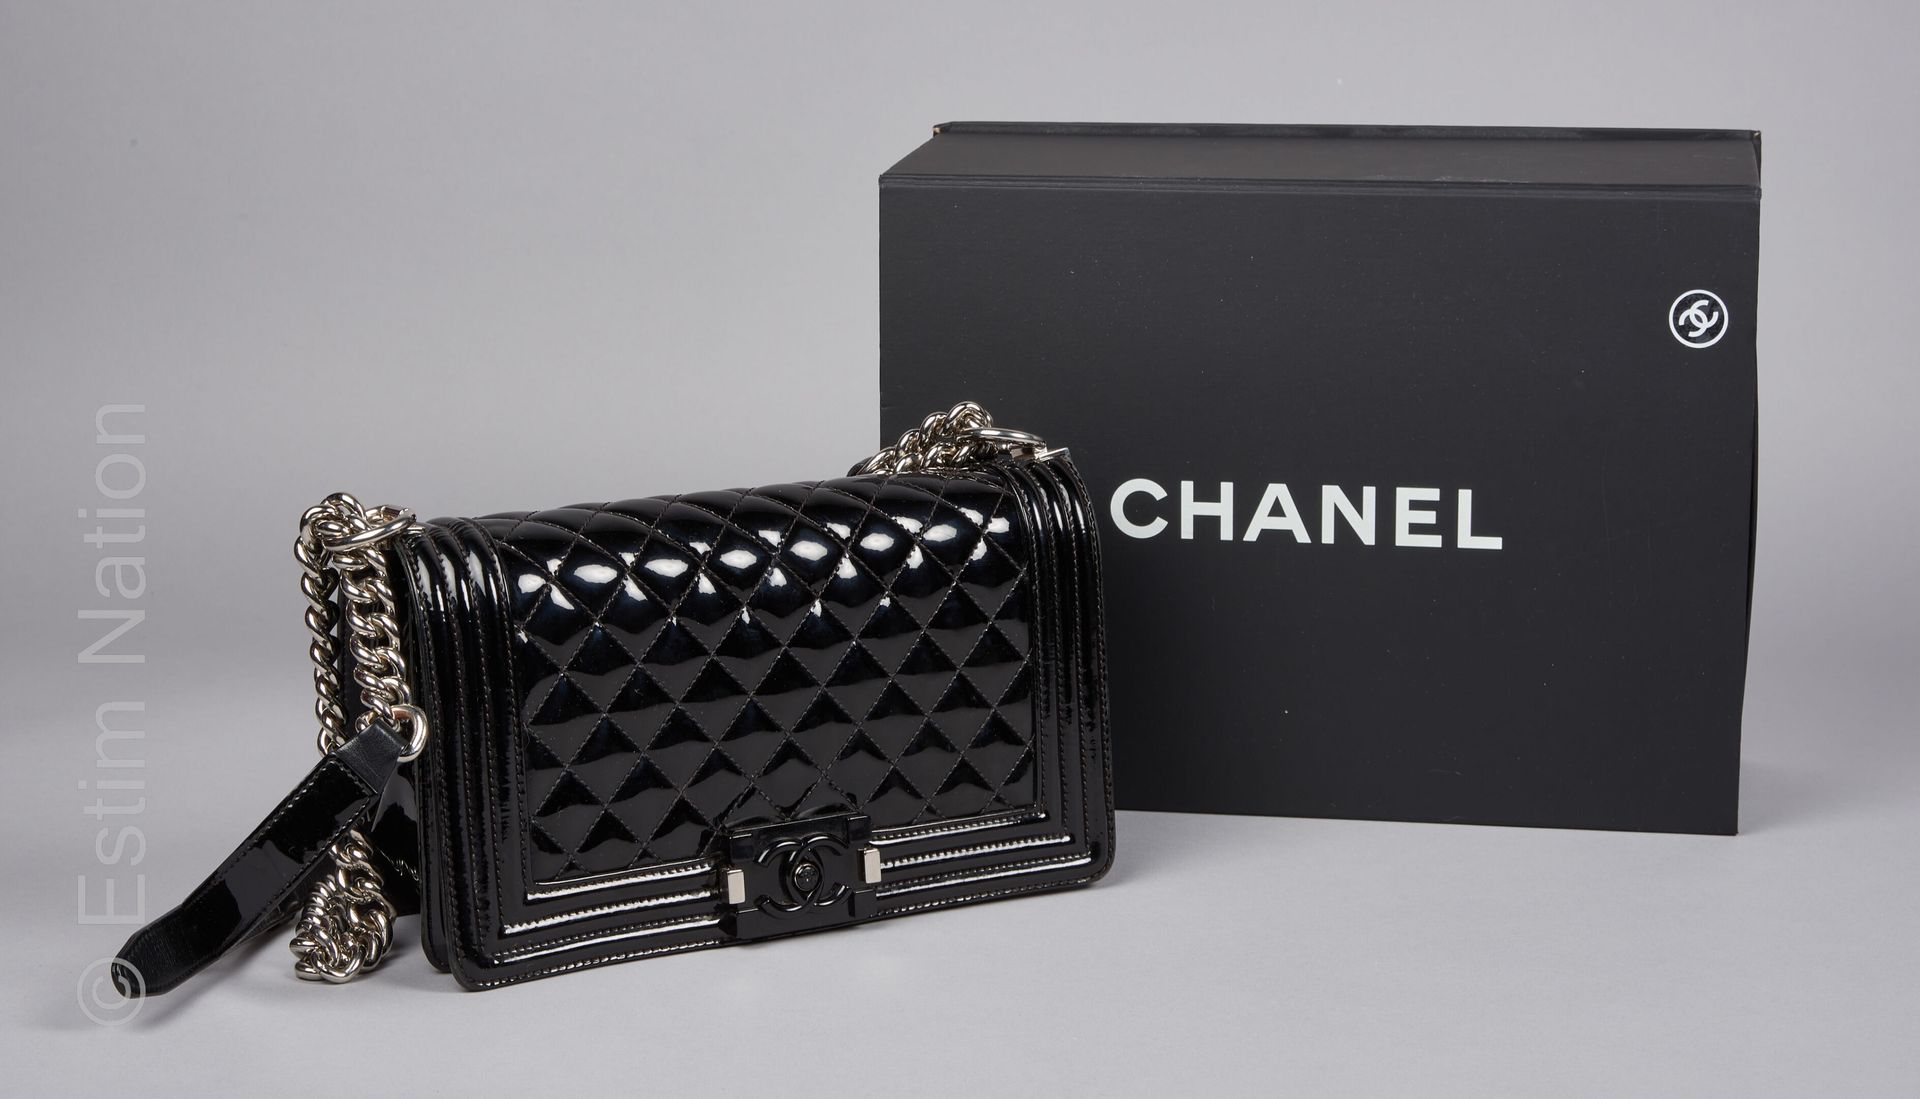 CHANEL (2014/2015) BAG "BOY" in quilted black patent calfskin, lining in black o&hellip;